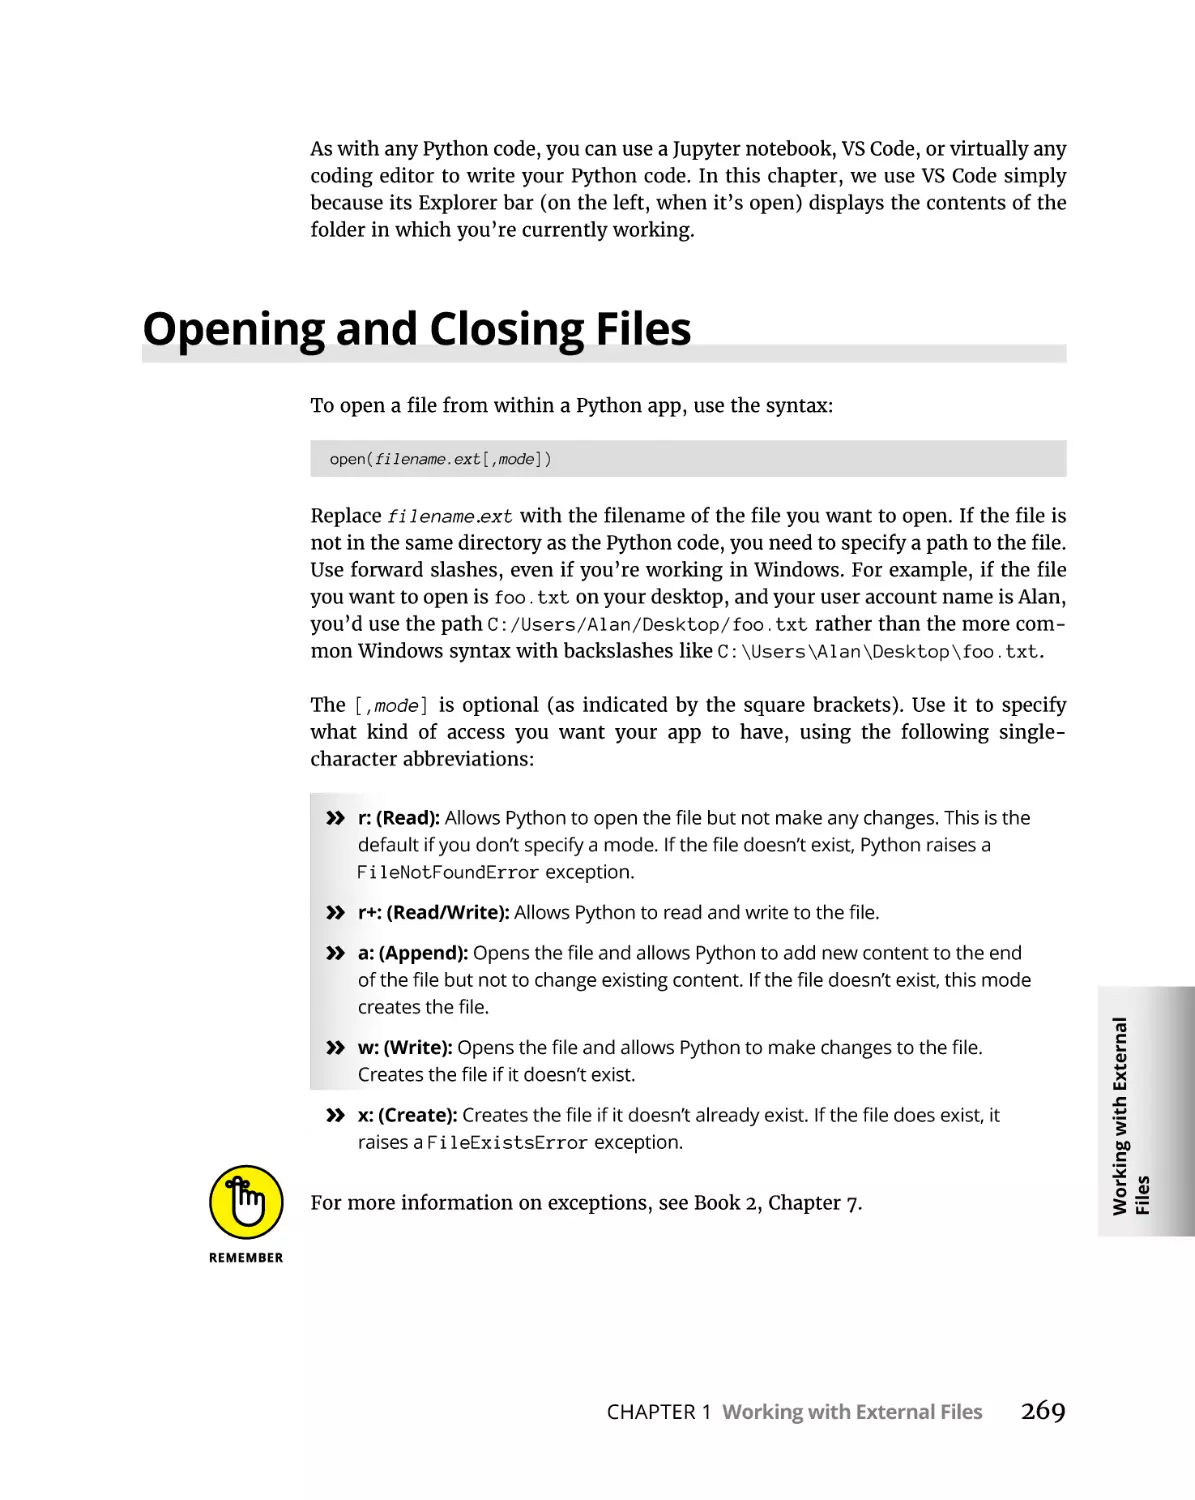 Opening and Closing Files